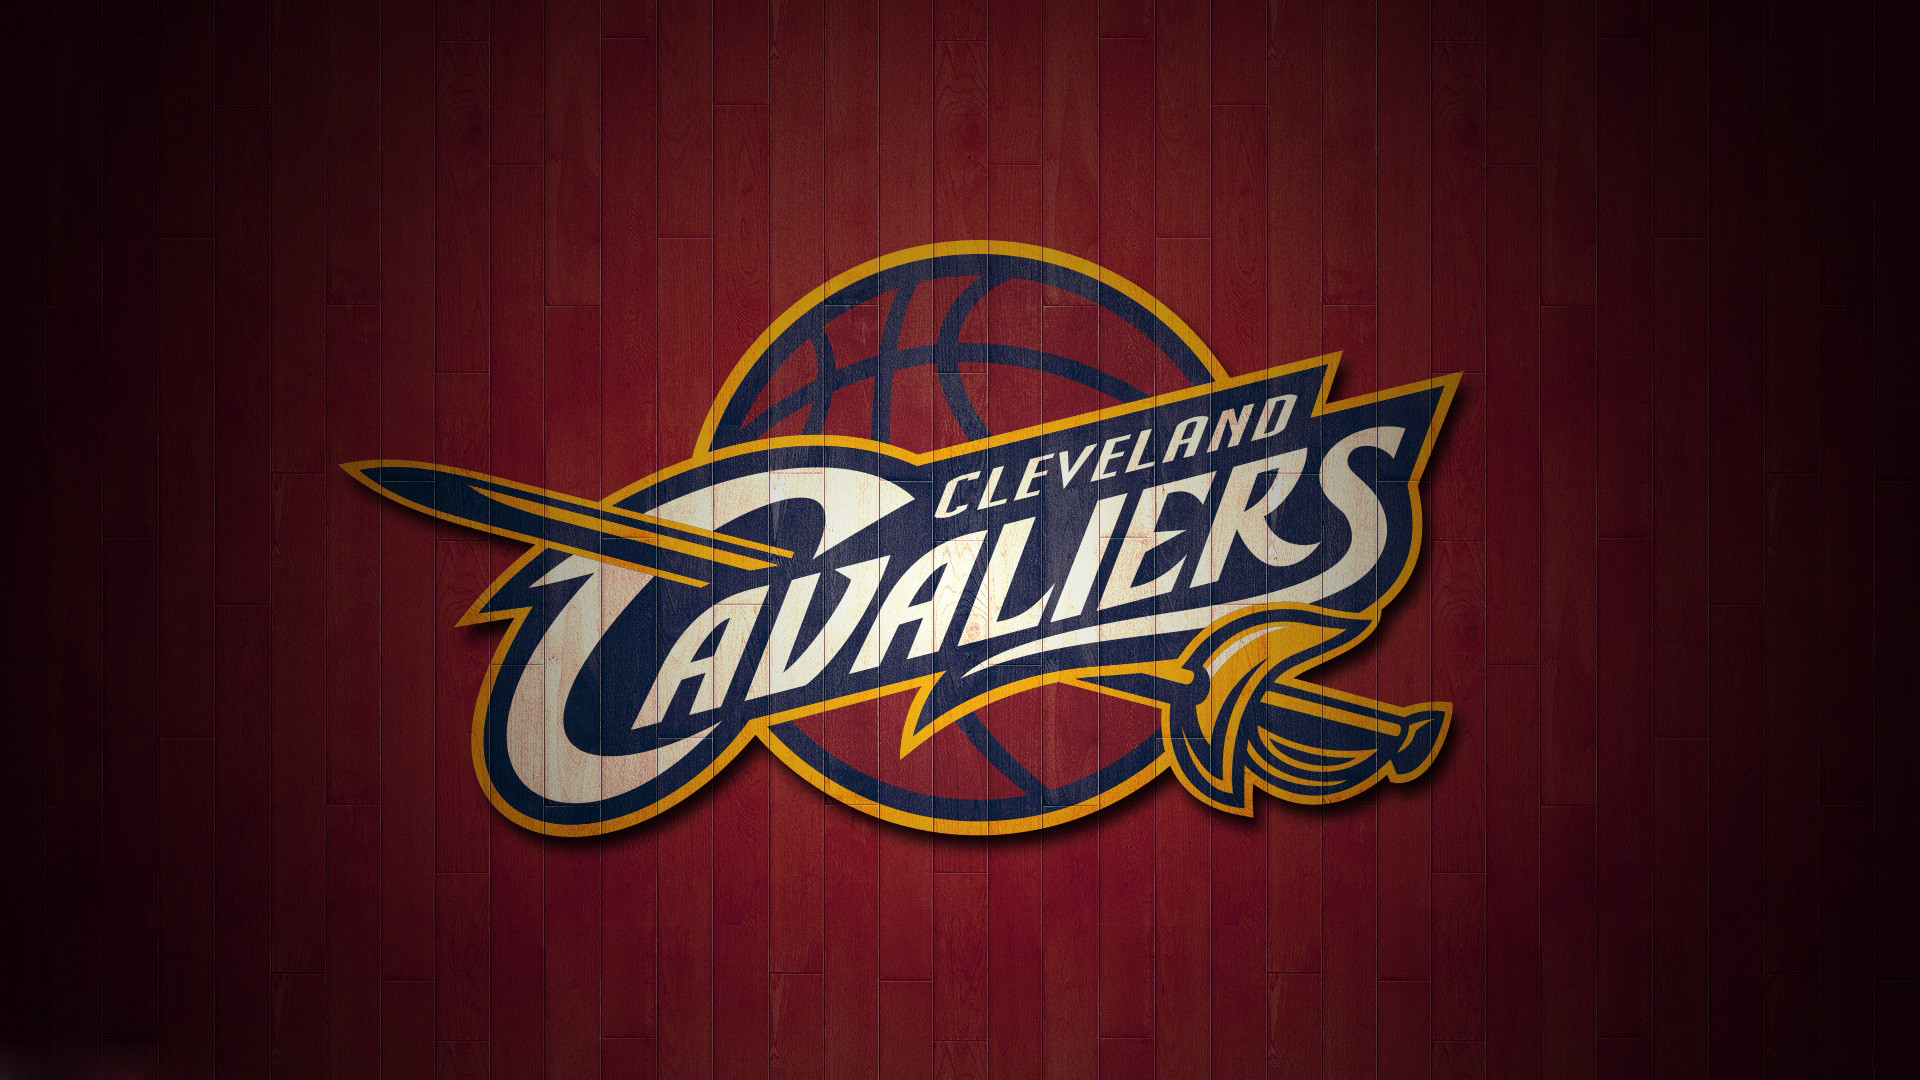 1920x1080 Images Cleveland Cavaliers Logo Wallpaper.